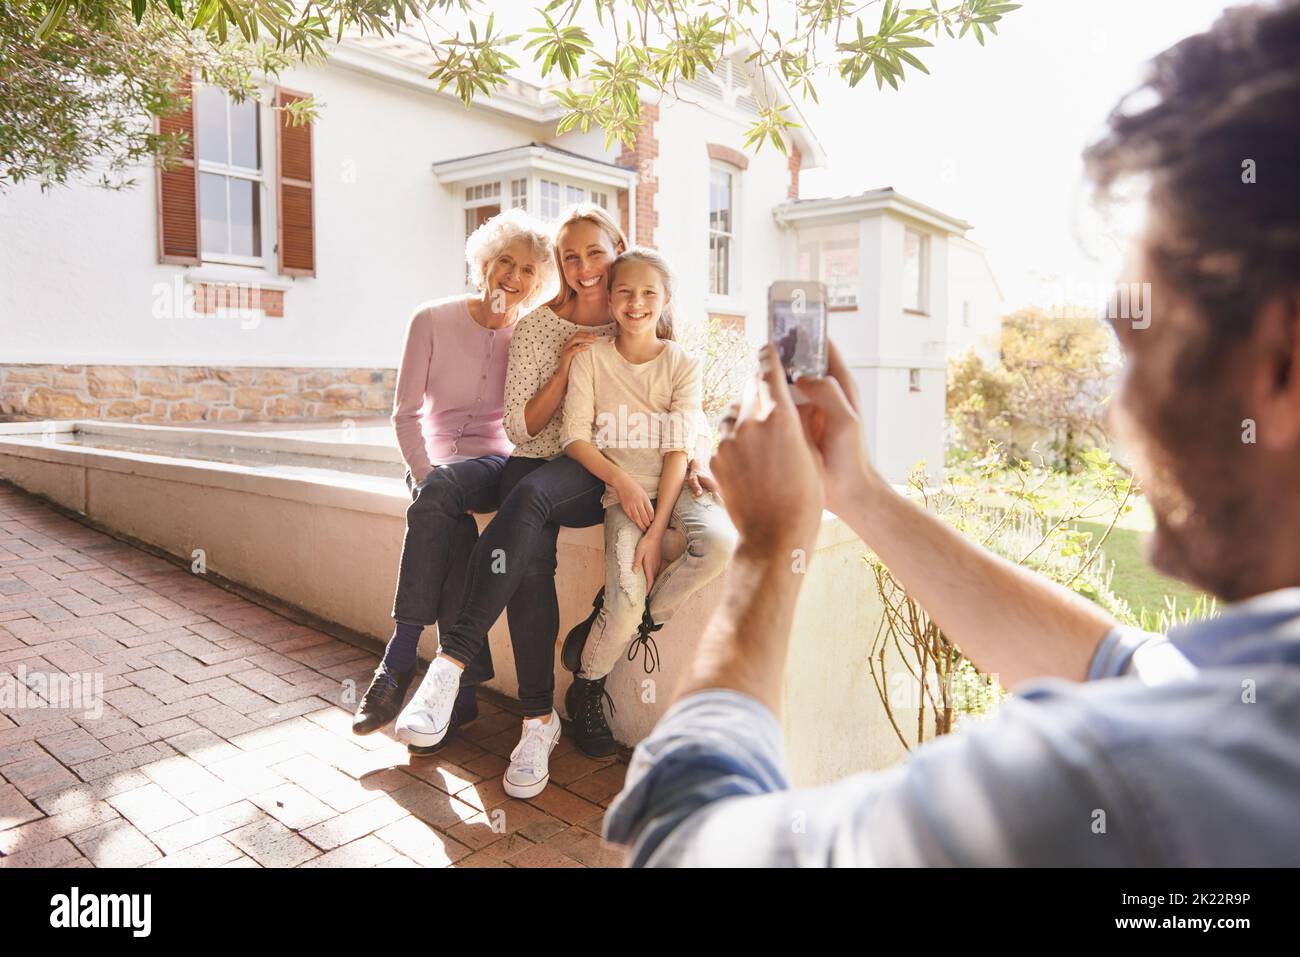 Capturing beautiful family moments. A man using his smartphone to take a photo of his family sitting outdoors. Stock Photo